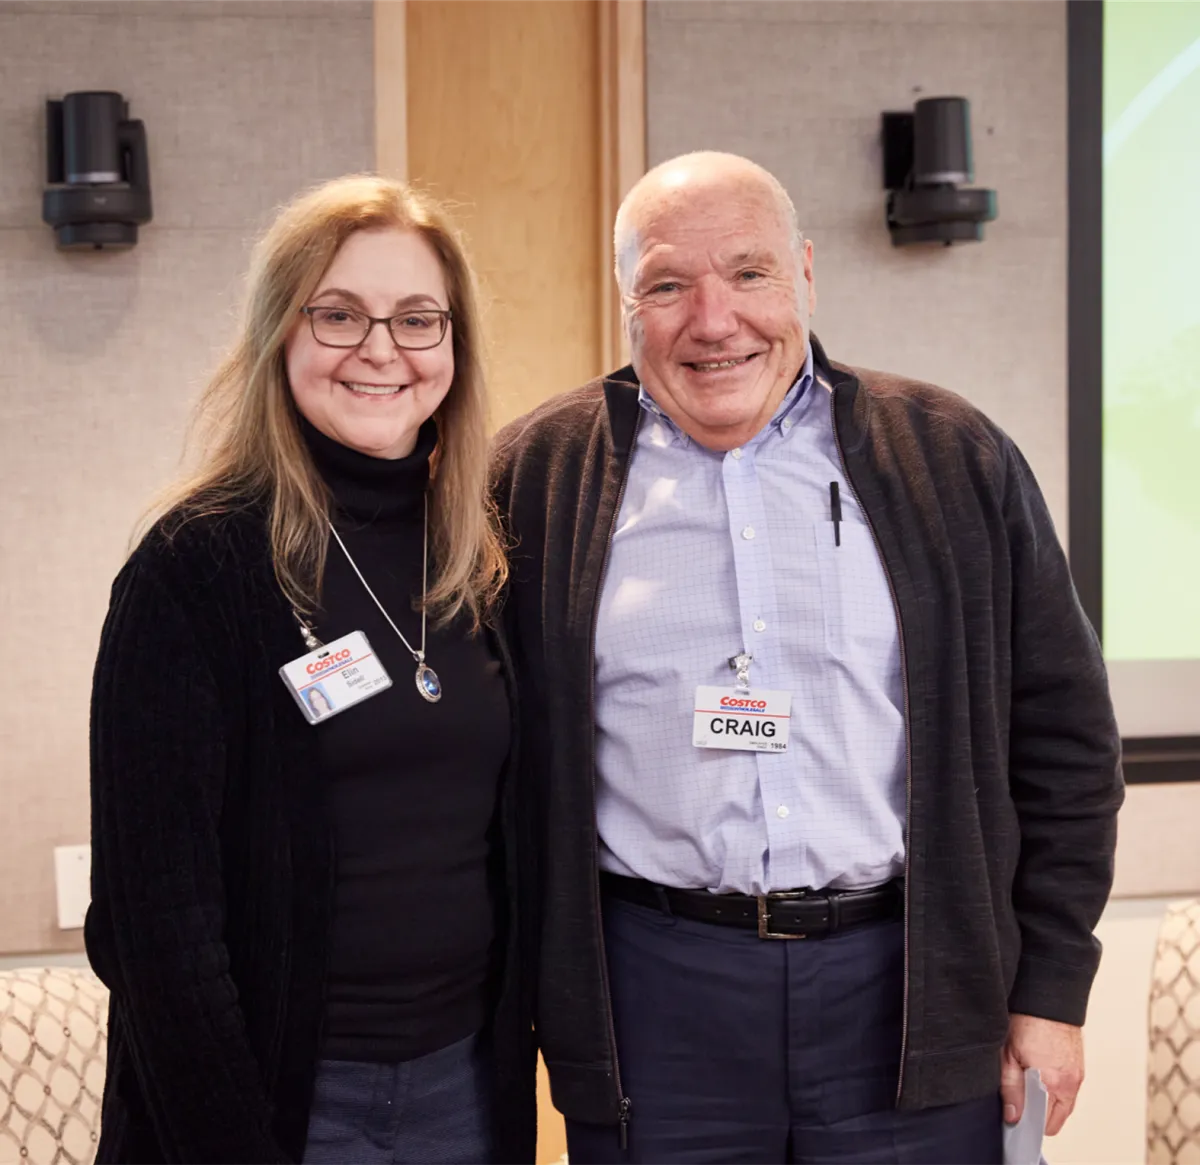 Elin Sidell with Costco founder Craig